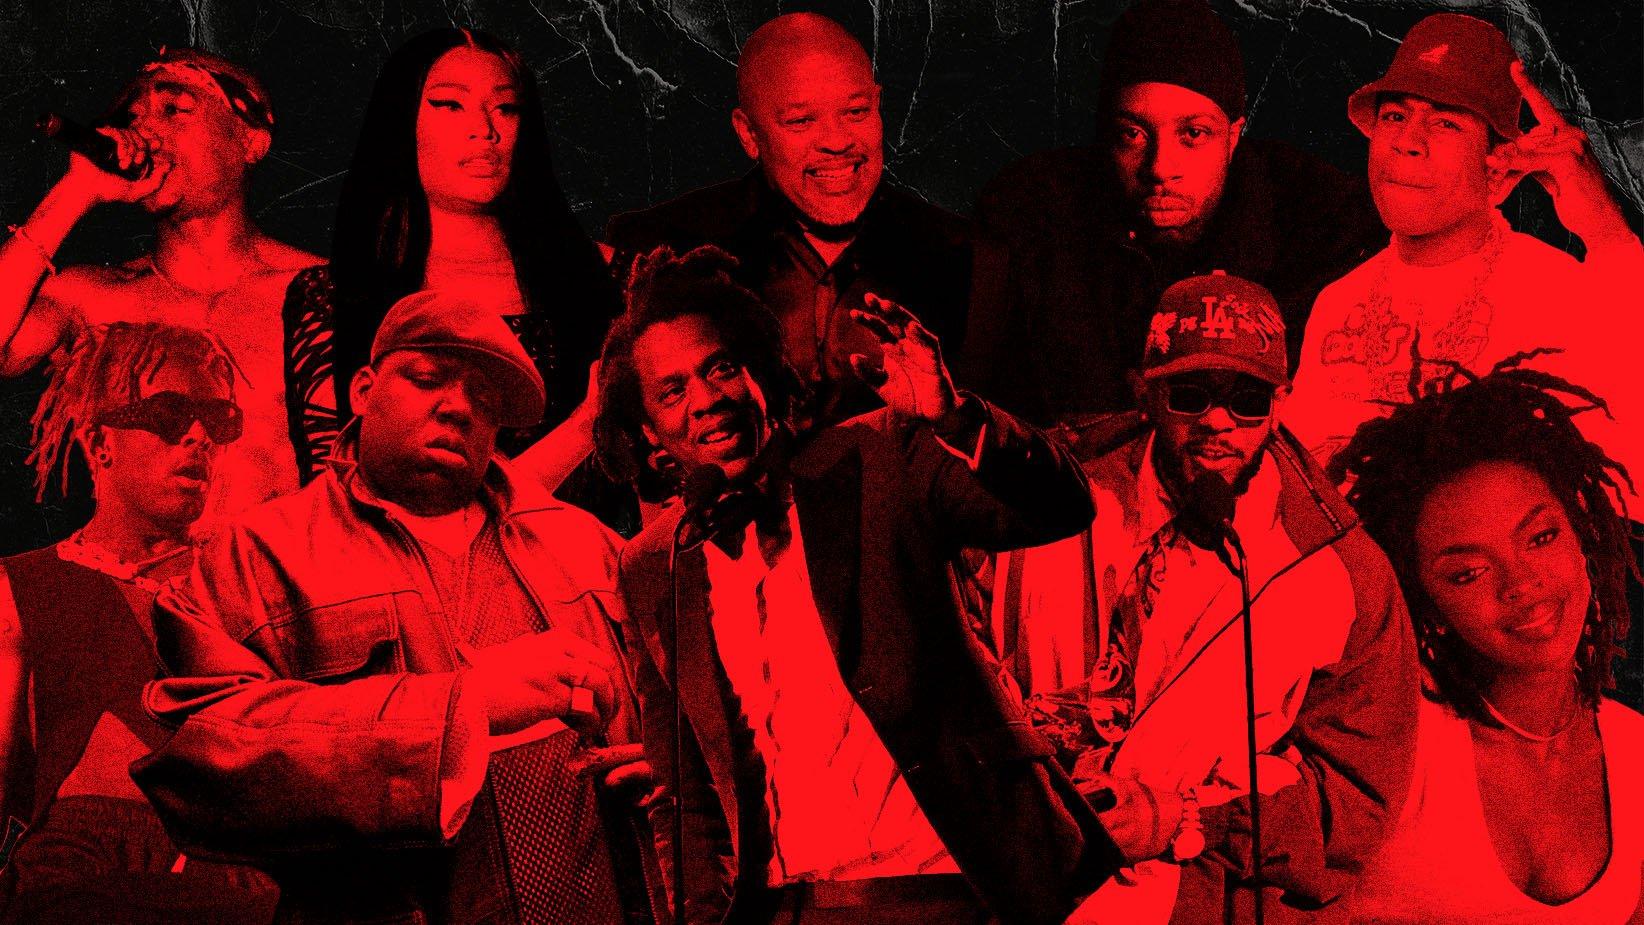 50 Artists Who Changed Rap: Jay-Z, The Notorious B.I.G., Dr. Dre